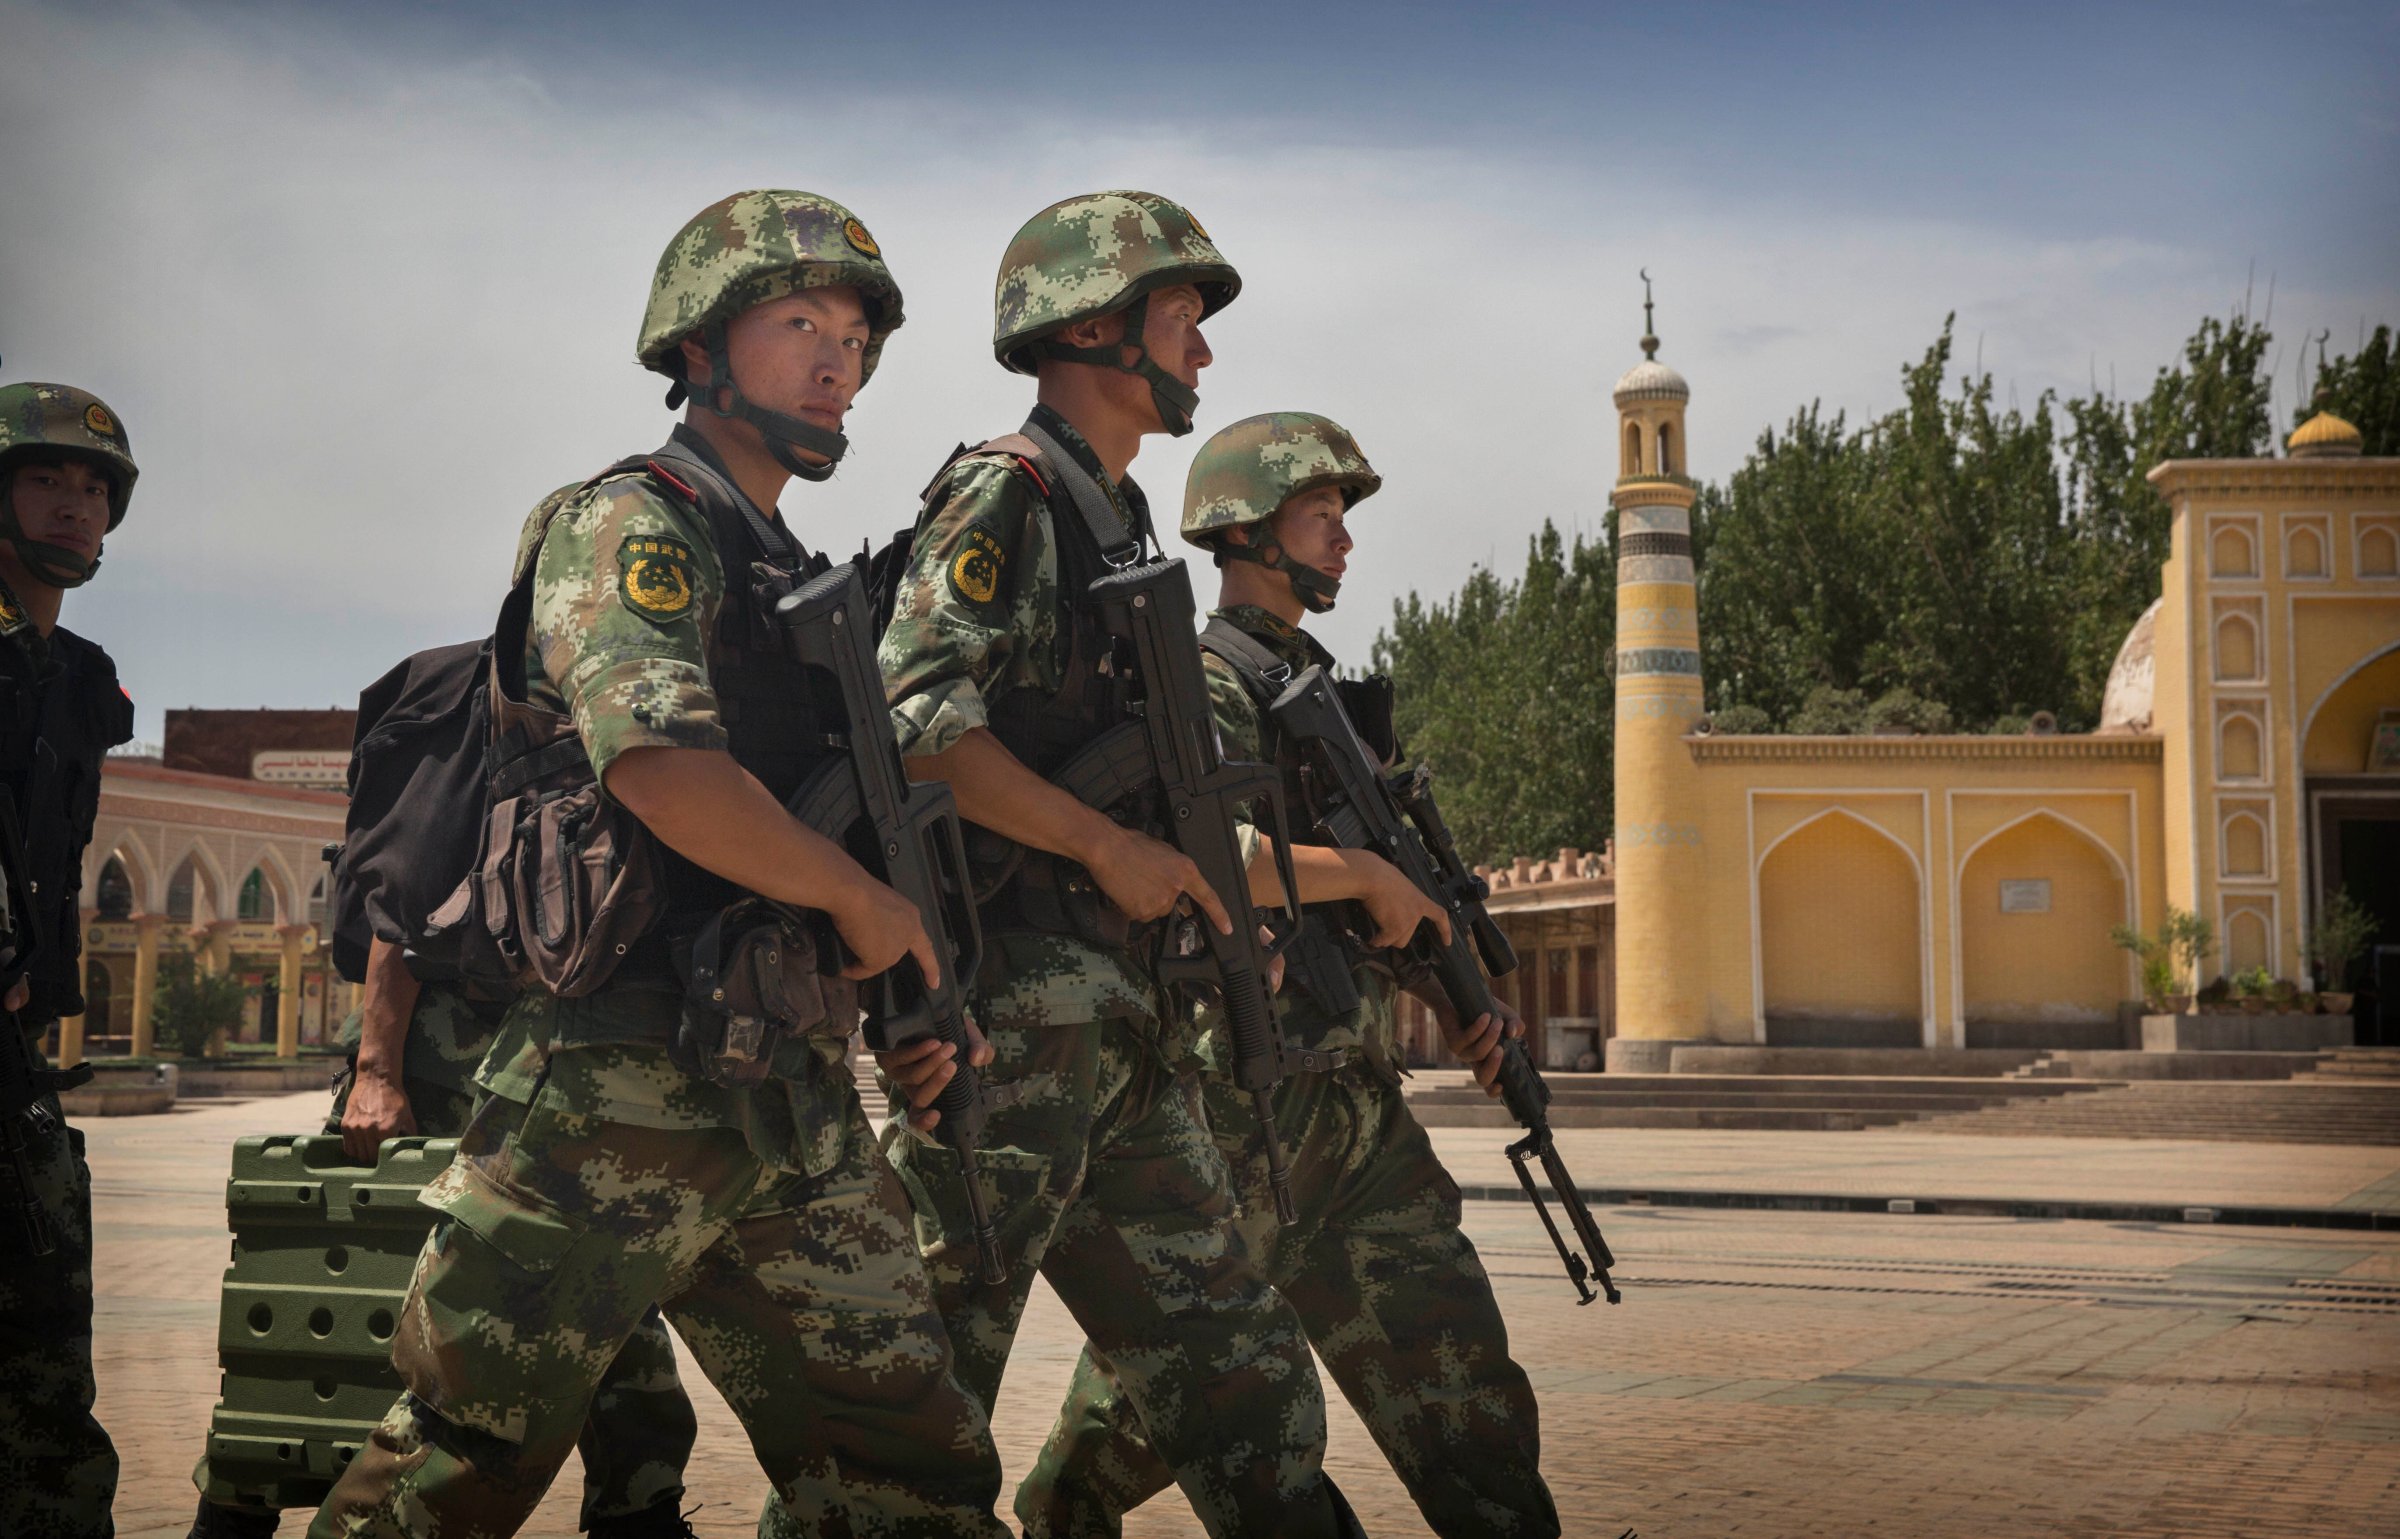 China Steps Up Security Following Xinjiang Unrest